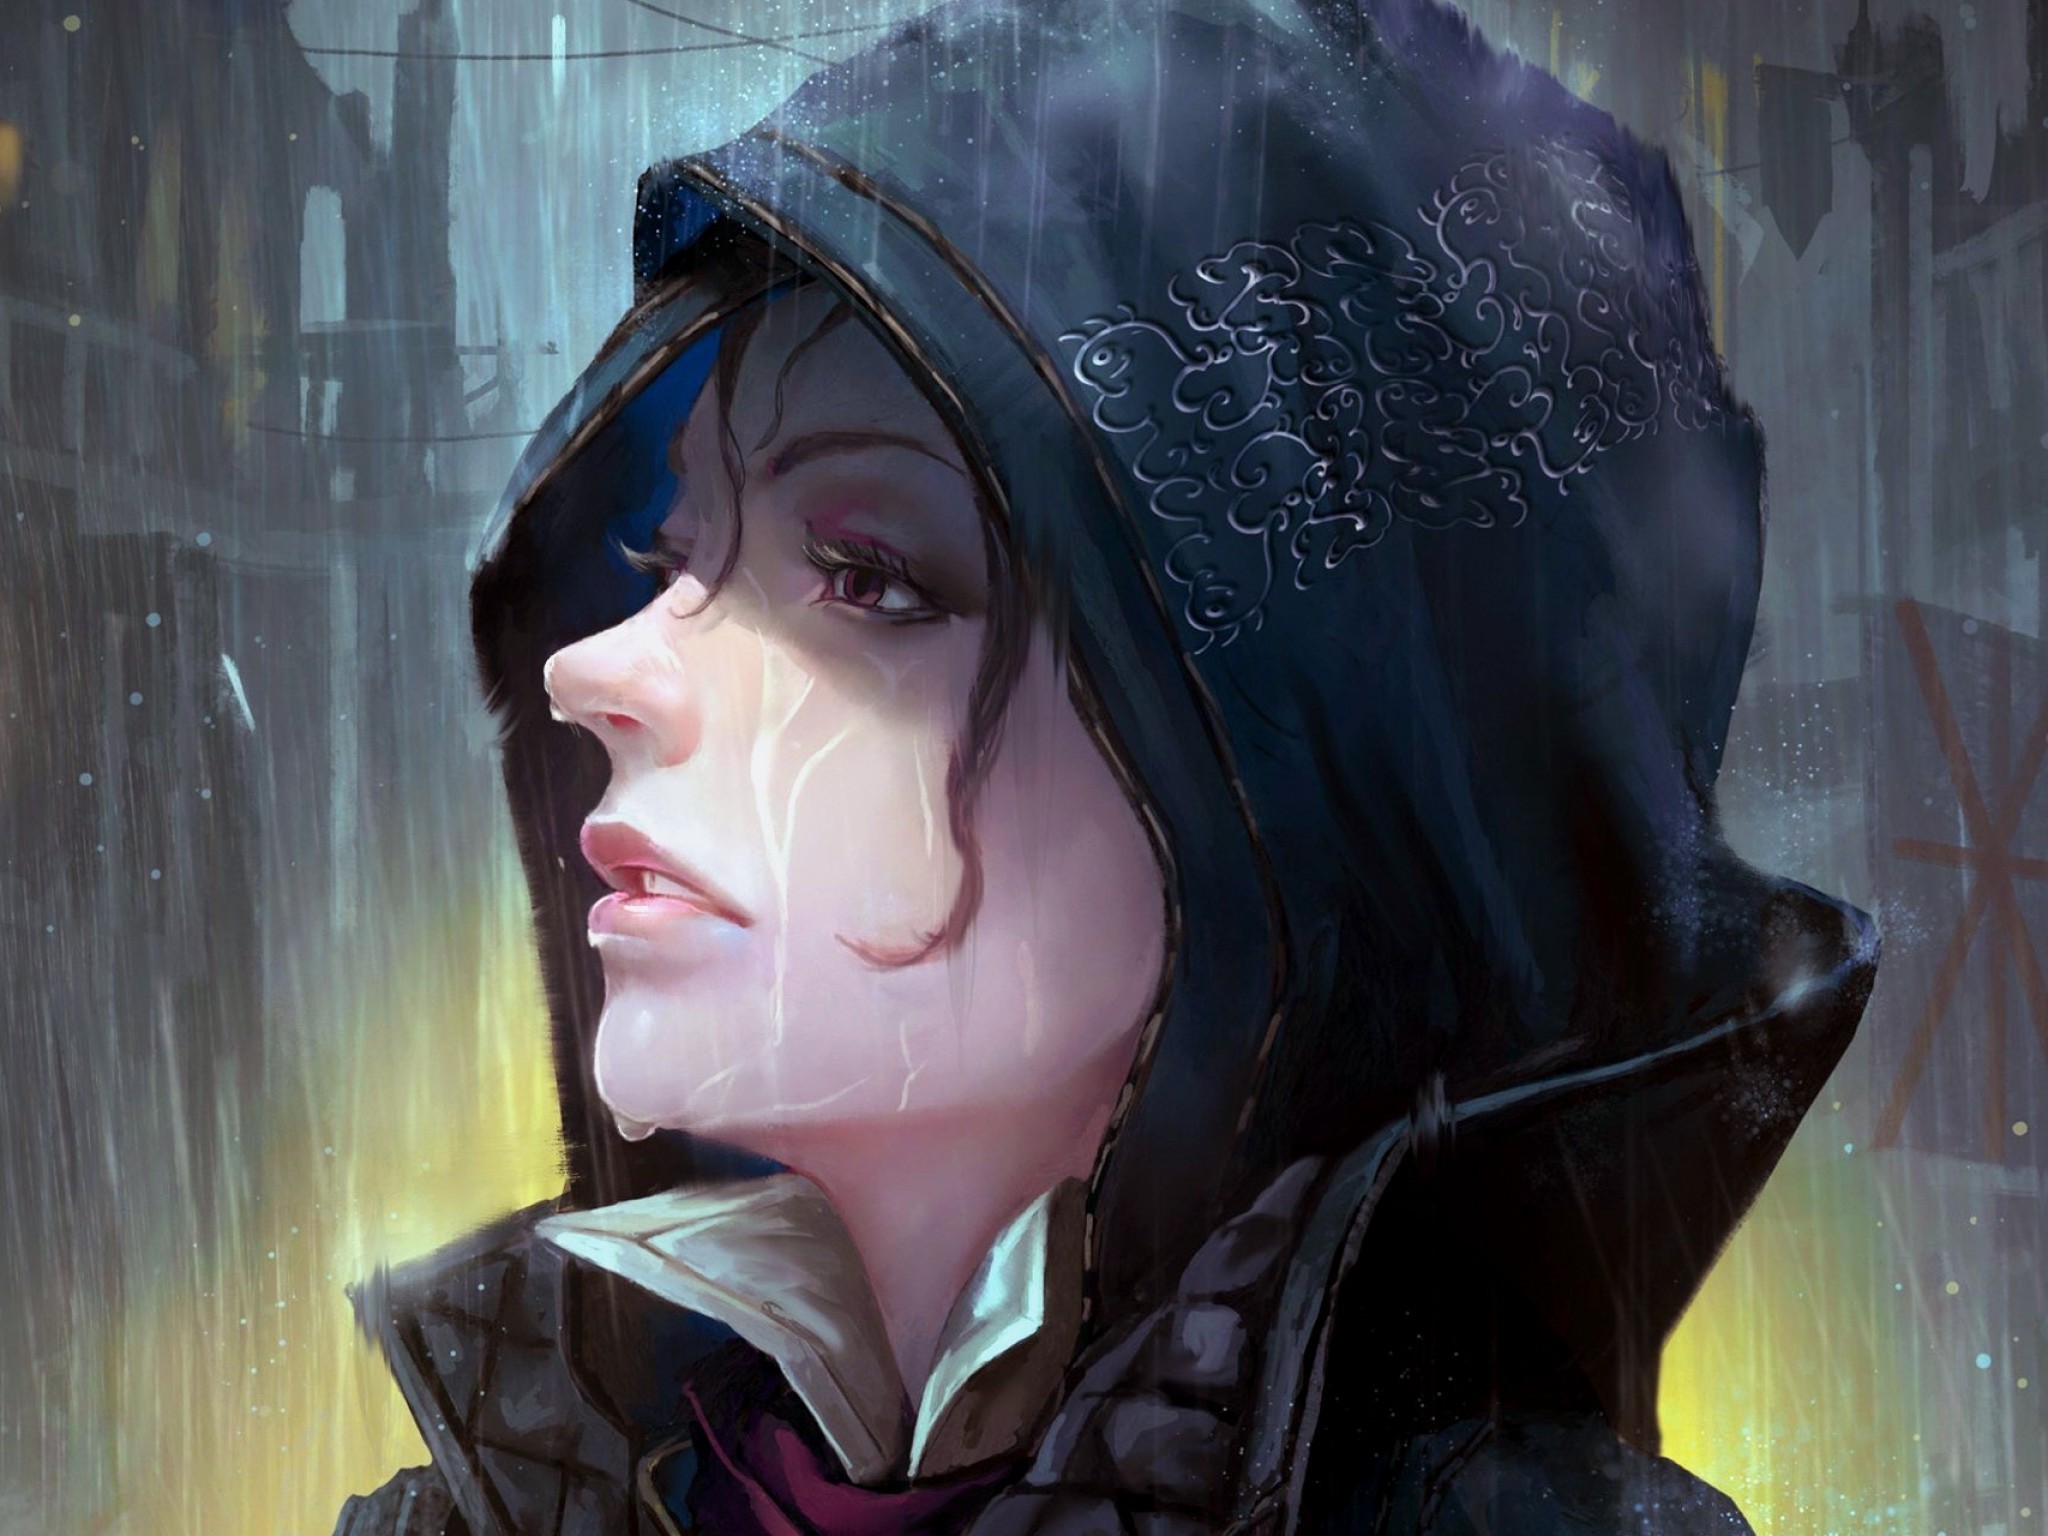 2048x1536 Assassin's Creed Syndicate, Evie Frye, Hood, Raining, Profile View